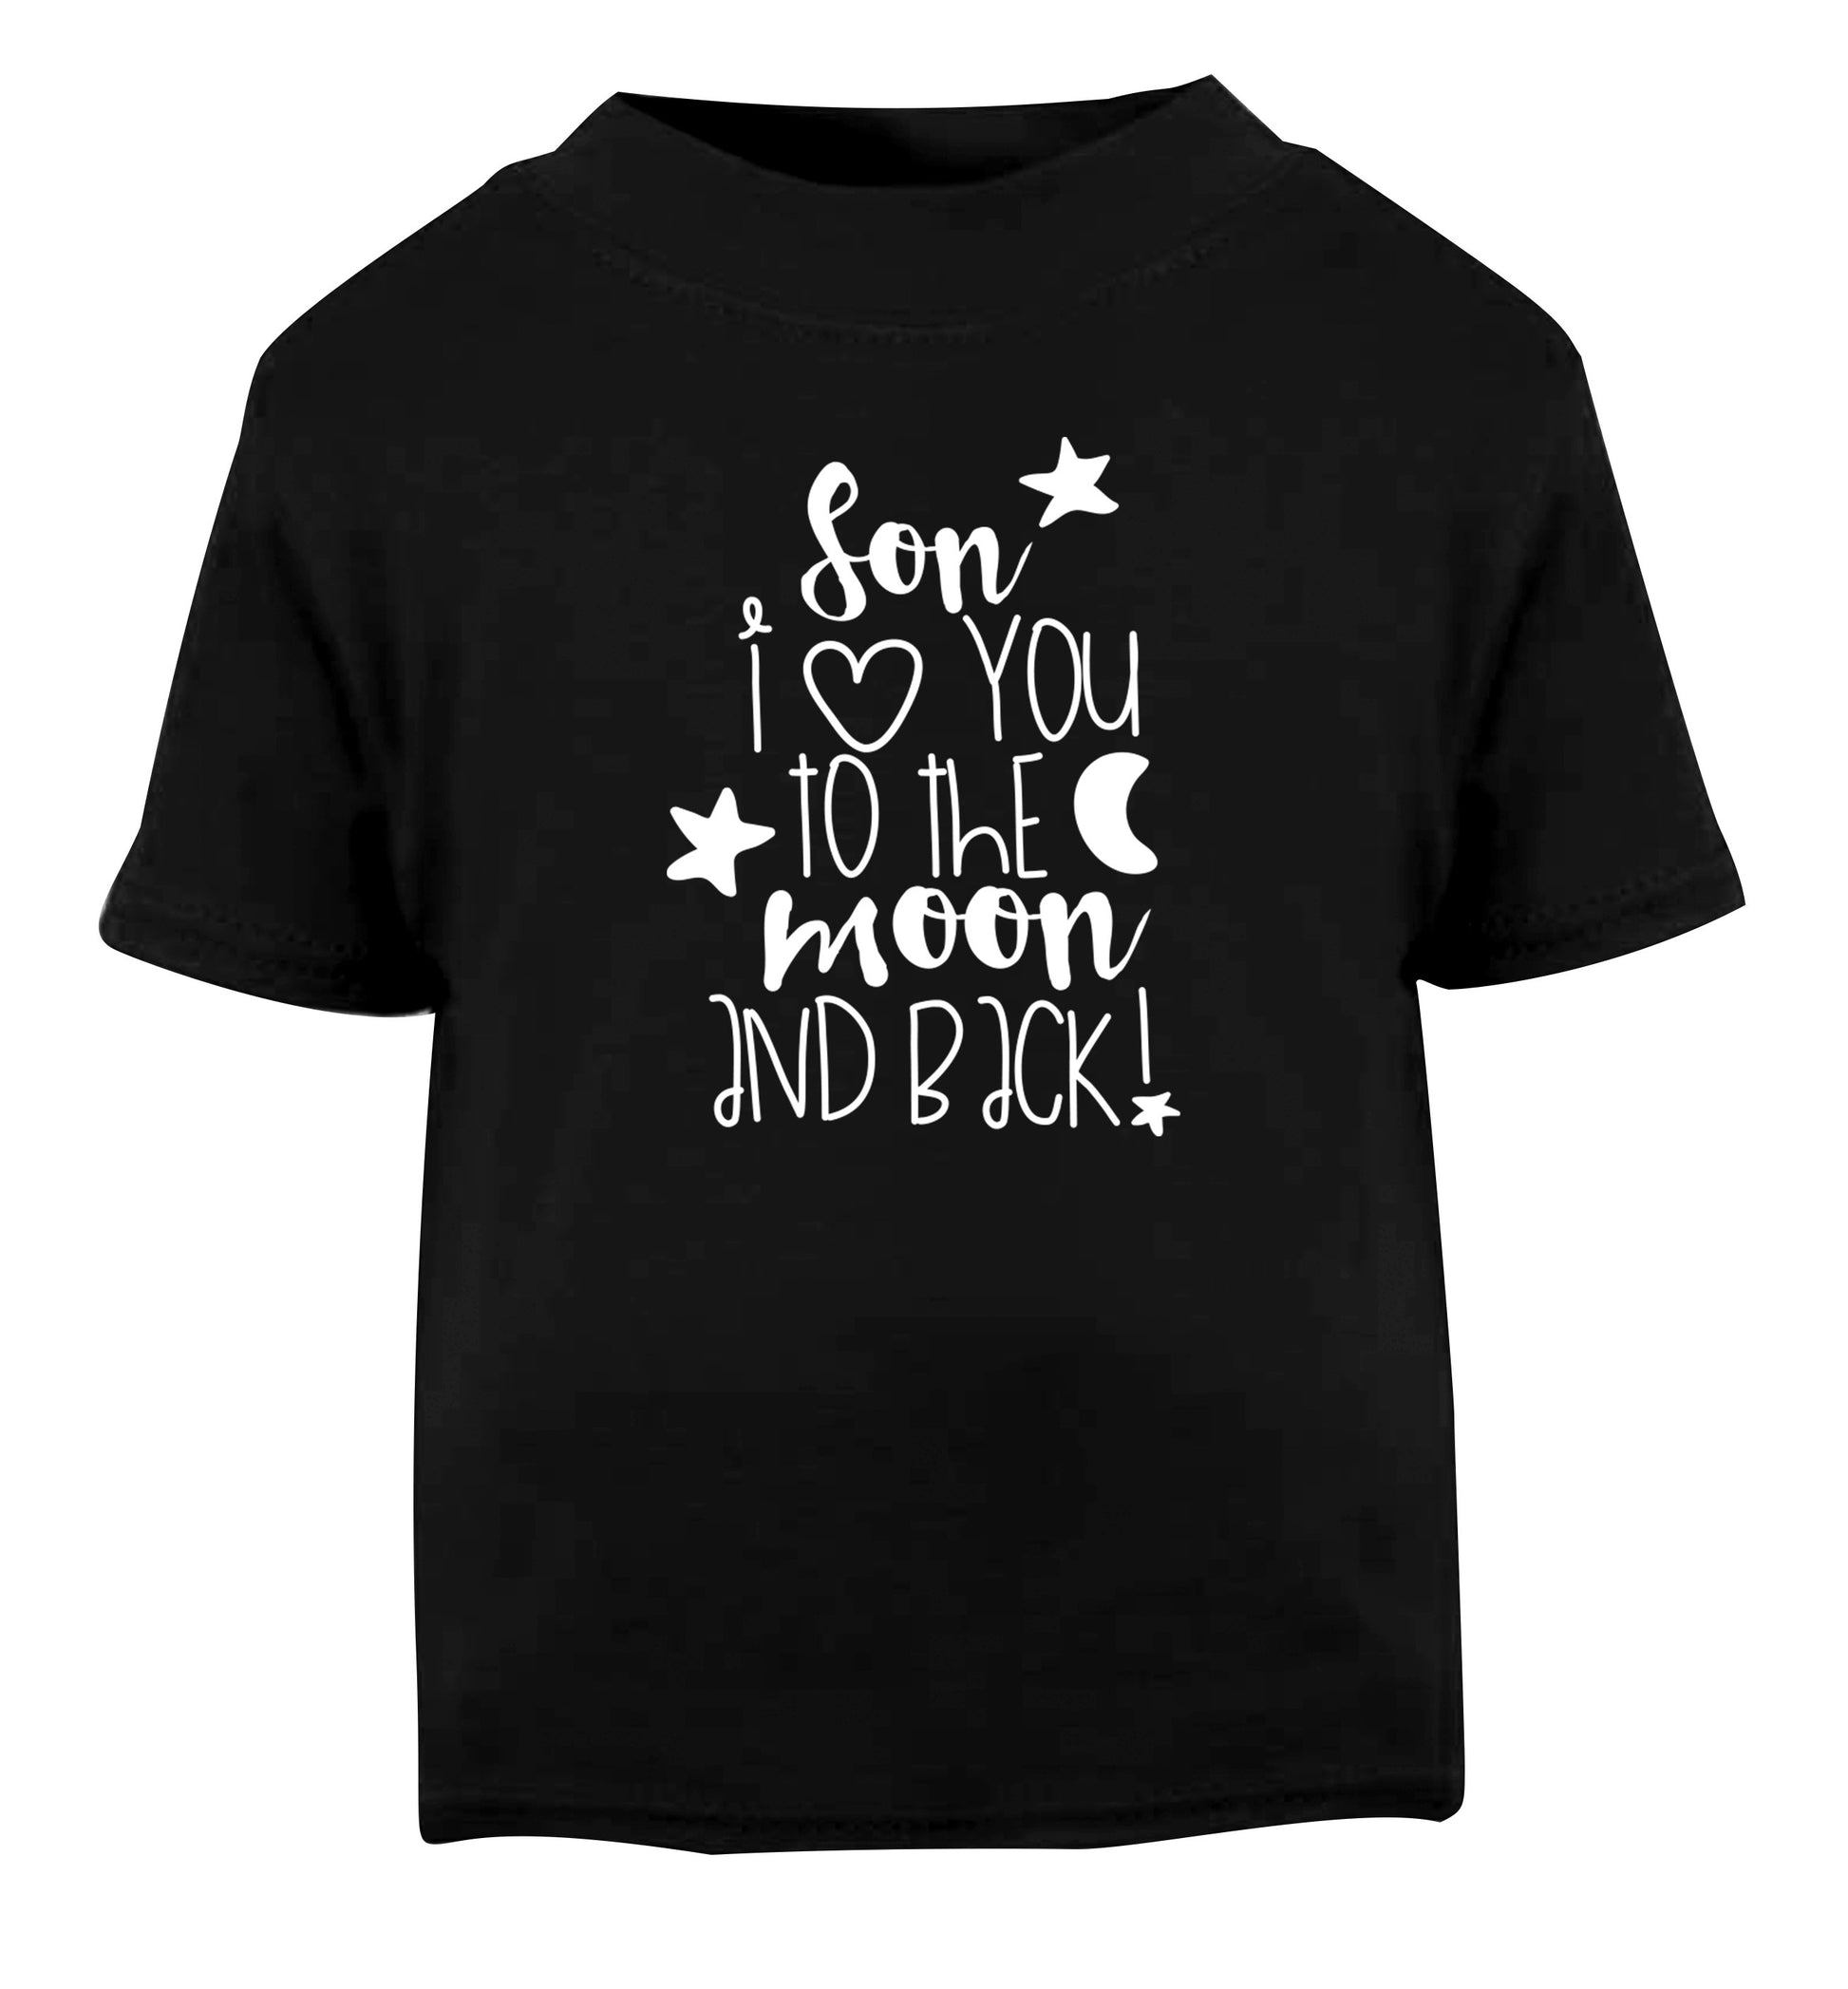 Son I love you to the moon and back Black Baby Toddler Tshirt 2 years